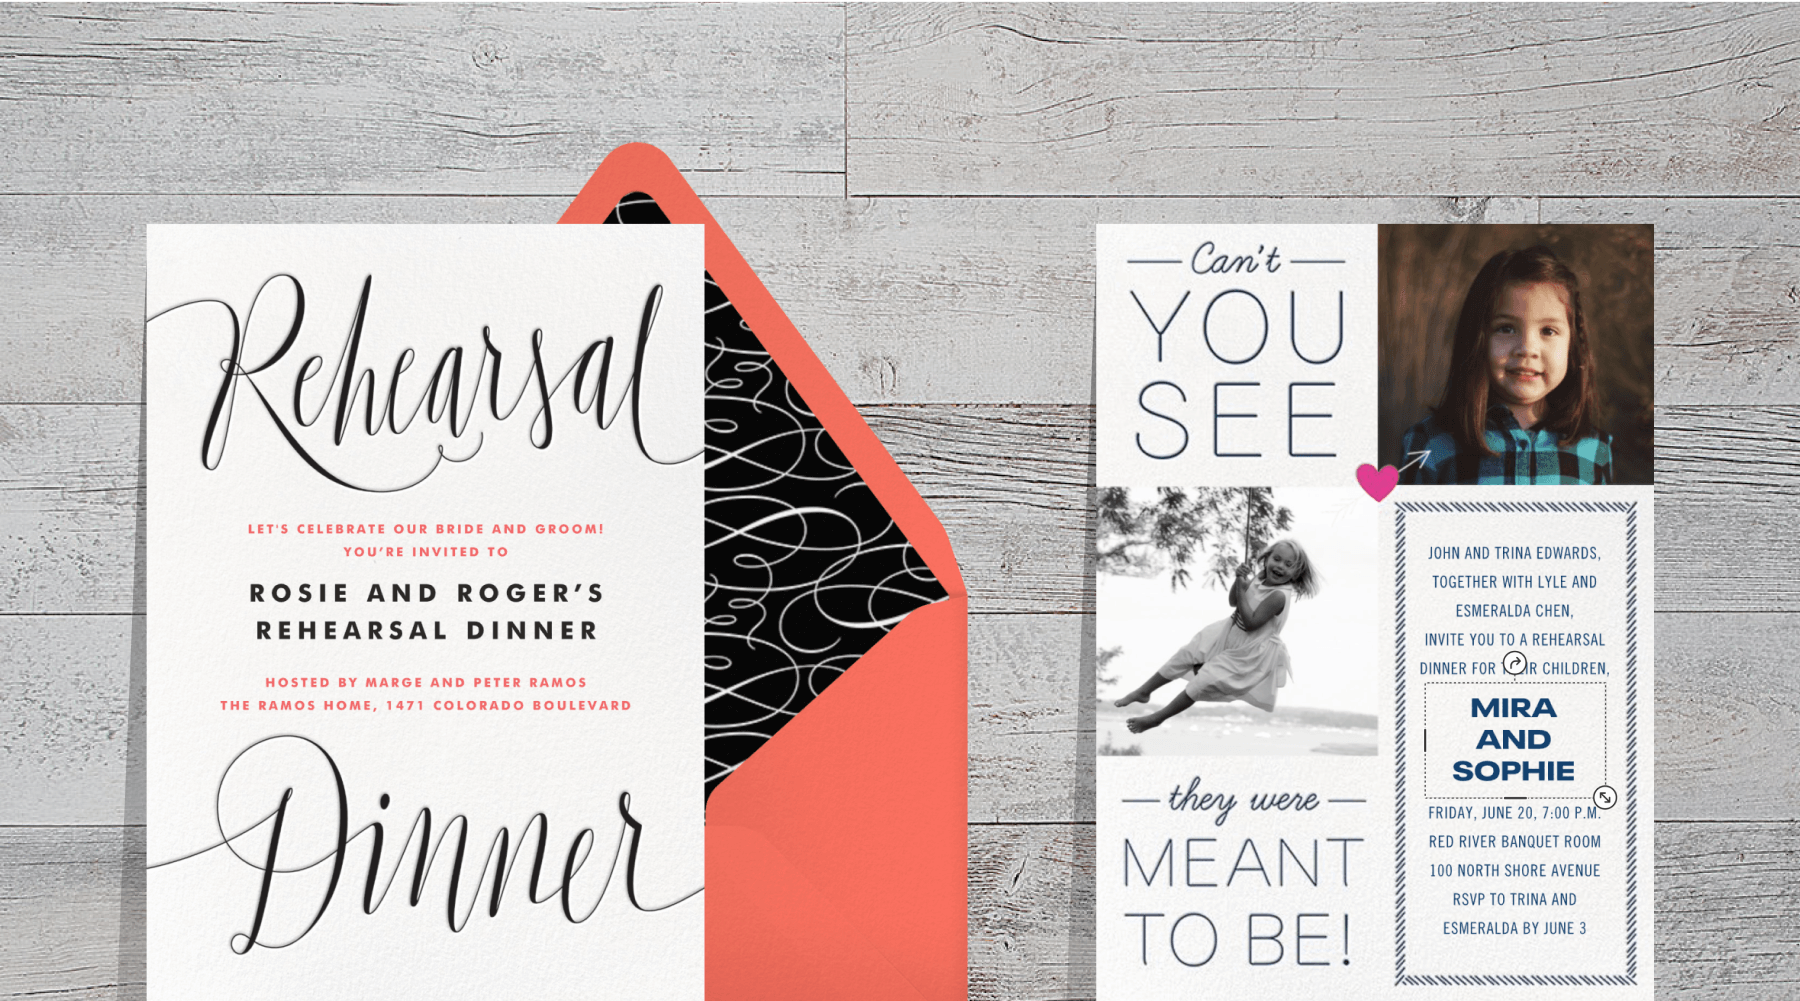 Two rehearsal dinner invitations side by side. The left has “Rehearsal Dinner” written in large script, the right has room for two photos and the words “Can’t you see they were meant to be!”